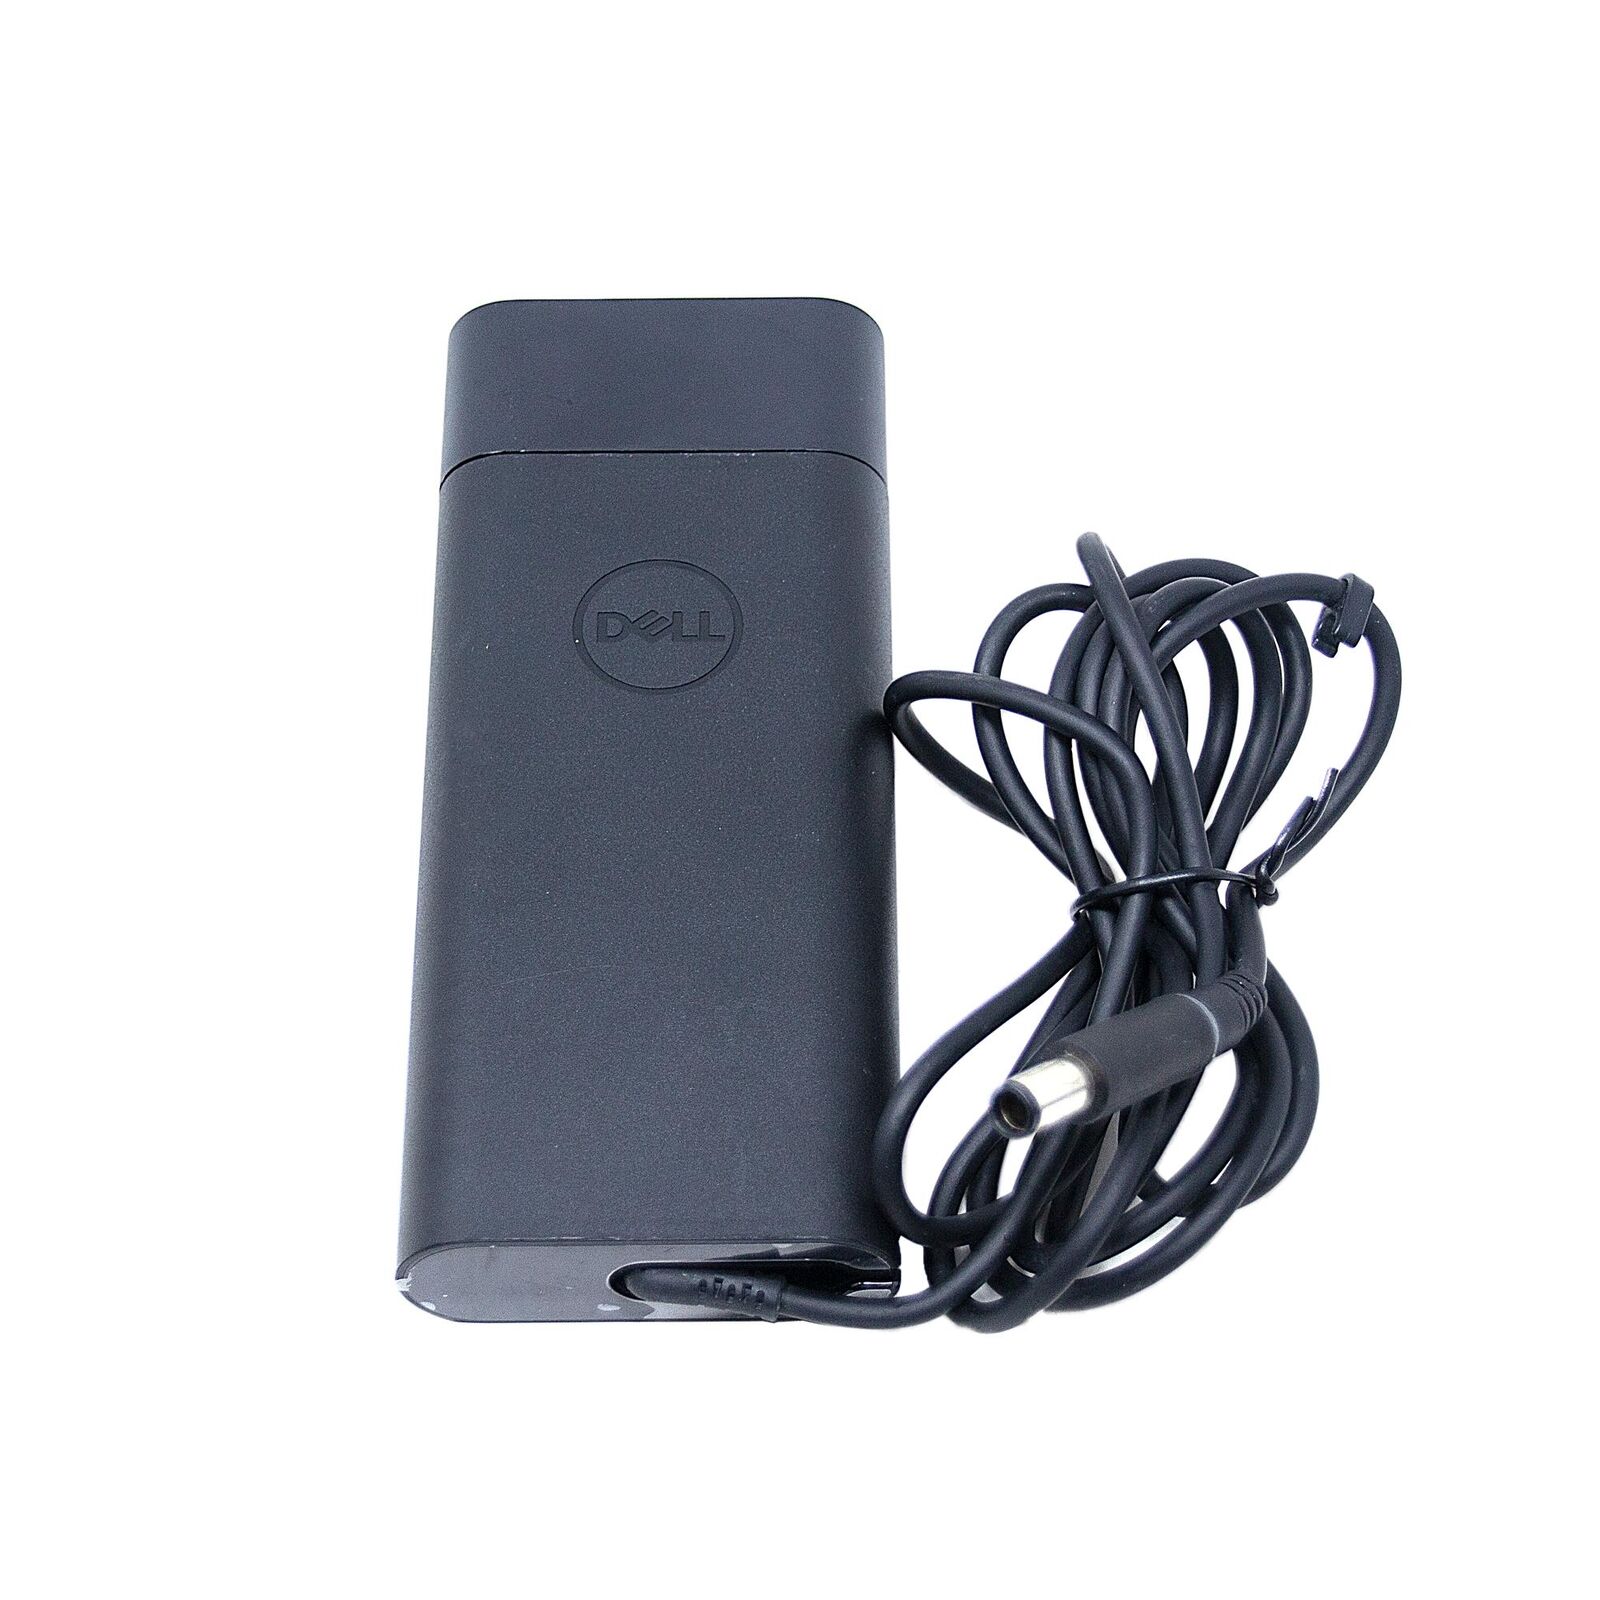 DELL Alienware M11x R3 P06T Genuine Original AC Power Adapter Charger